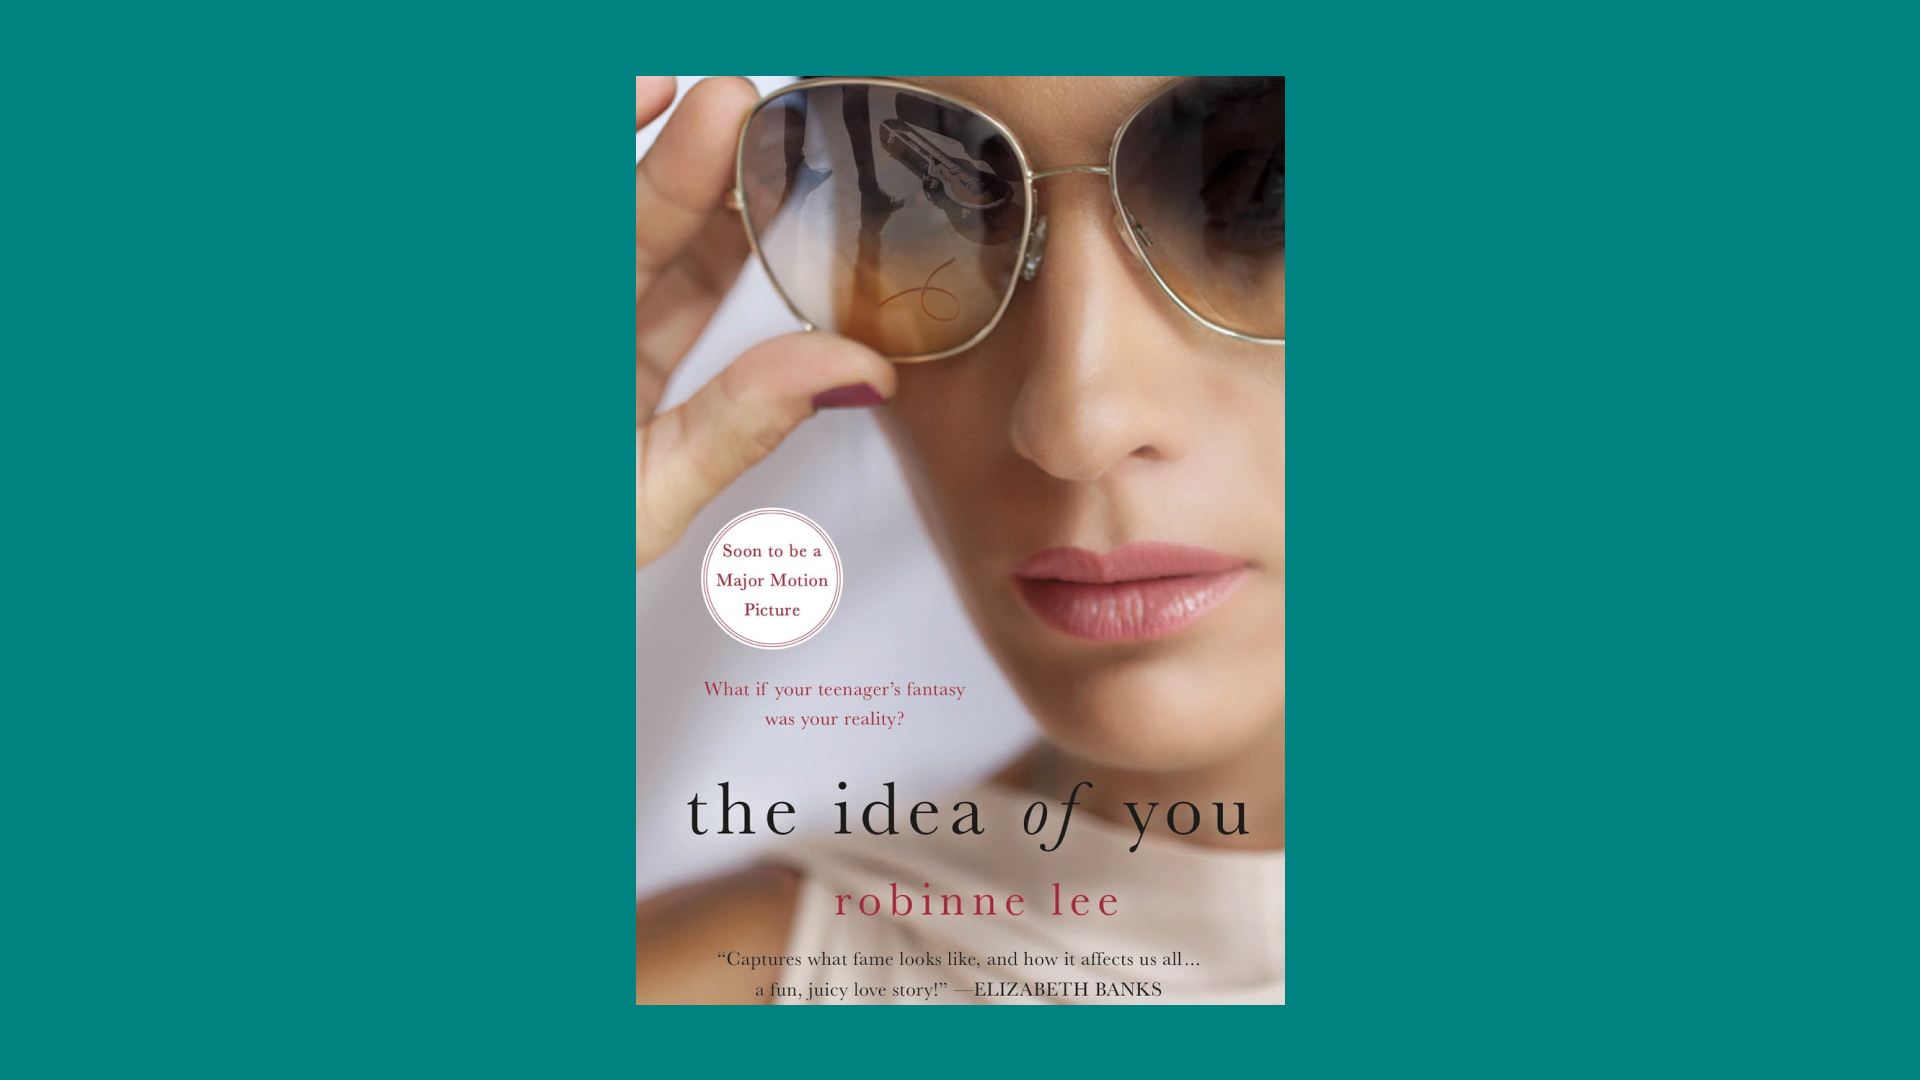 “The Idea of You” by Robinne Lee